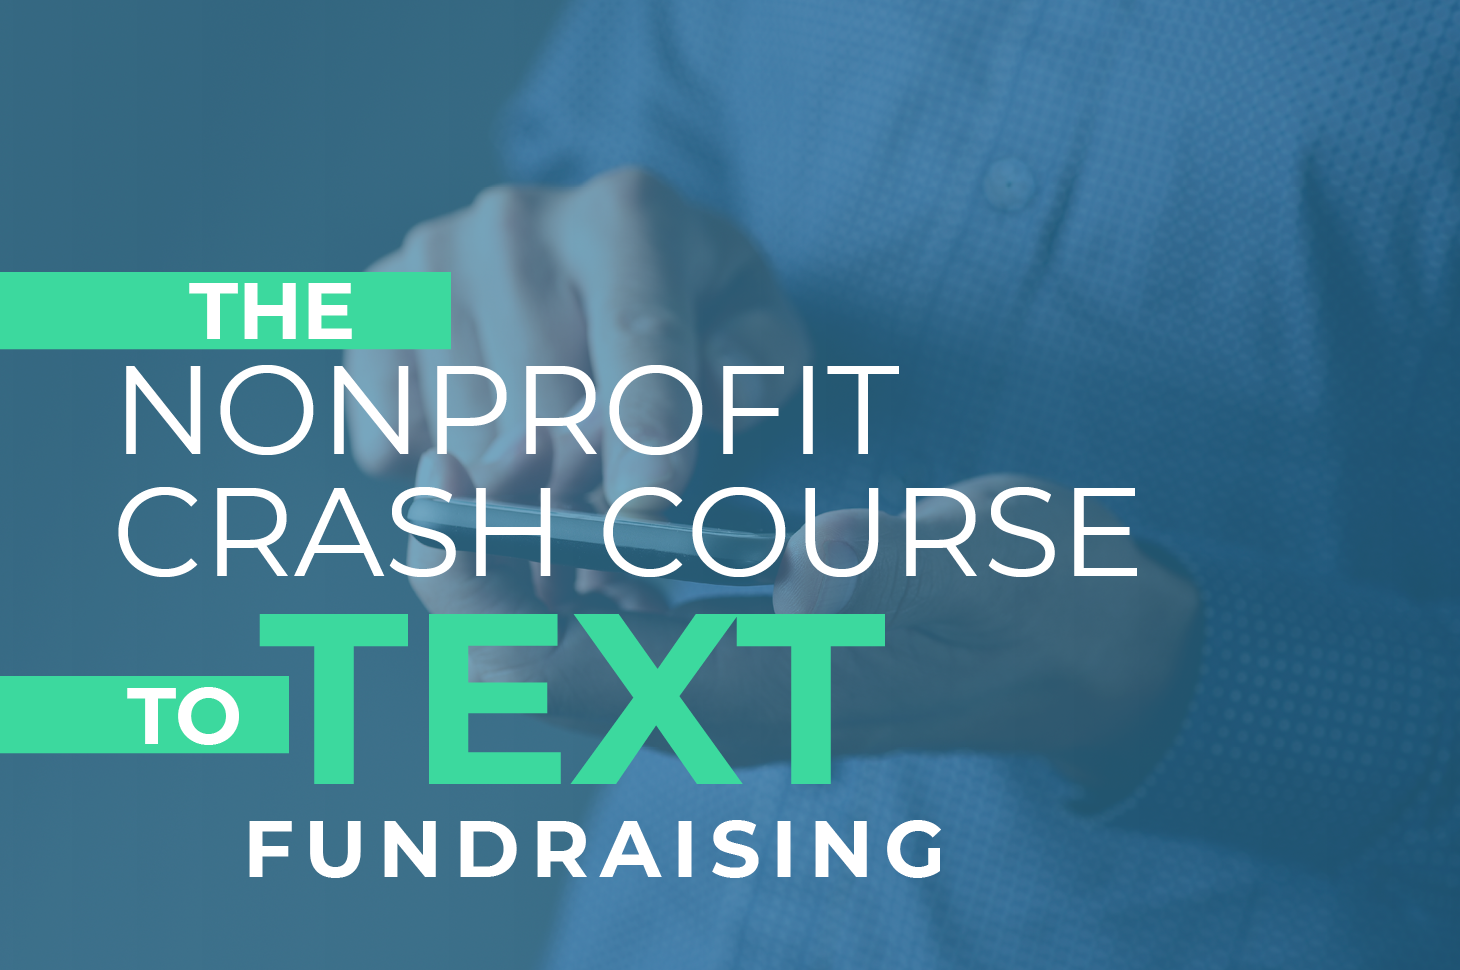 The Nonprofit Crash Course to Text Fundraising